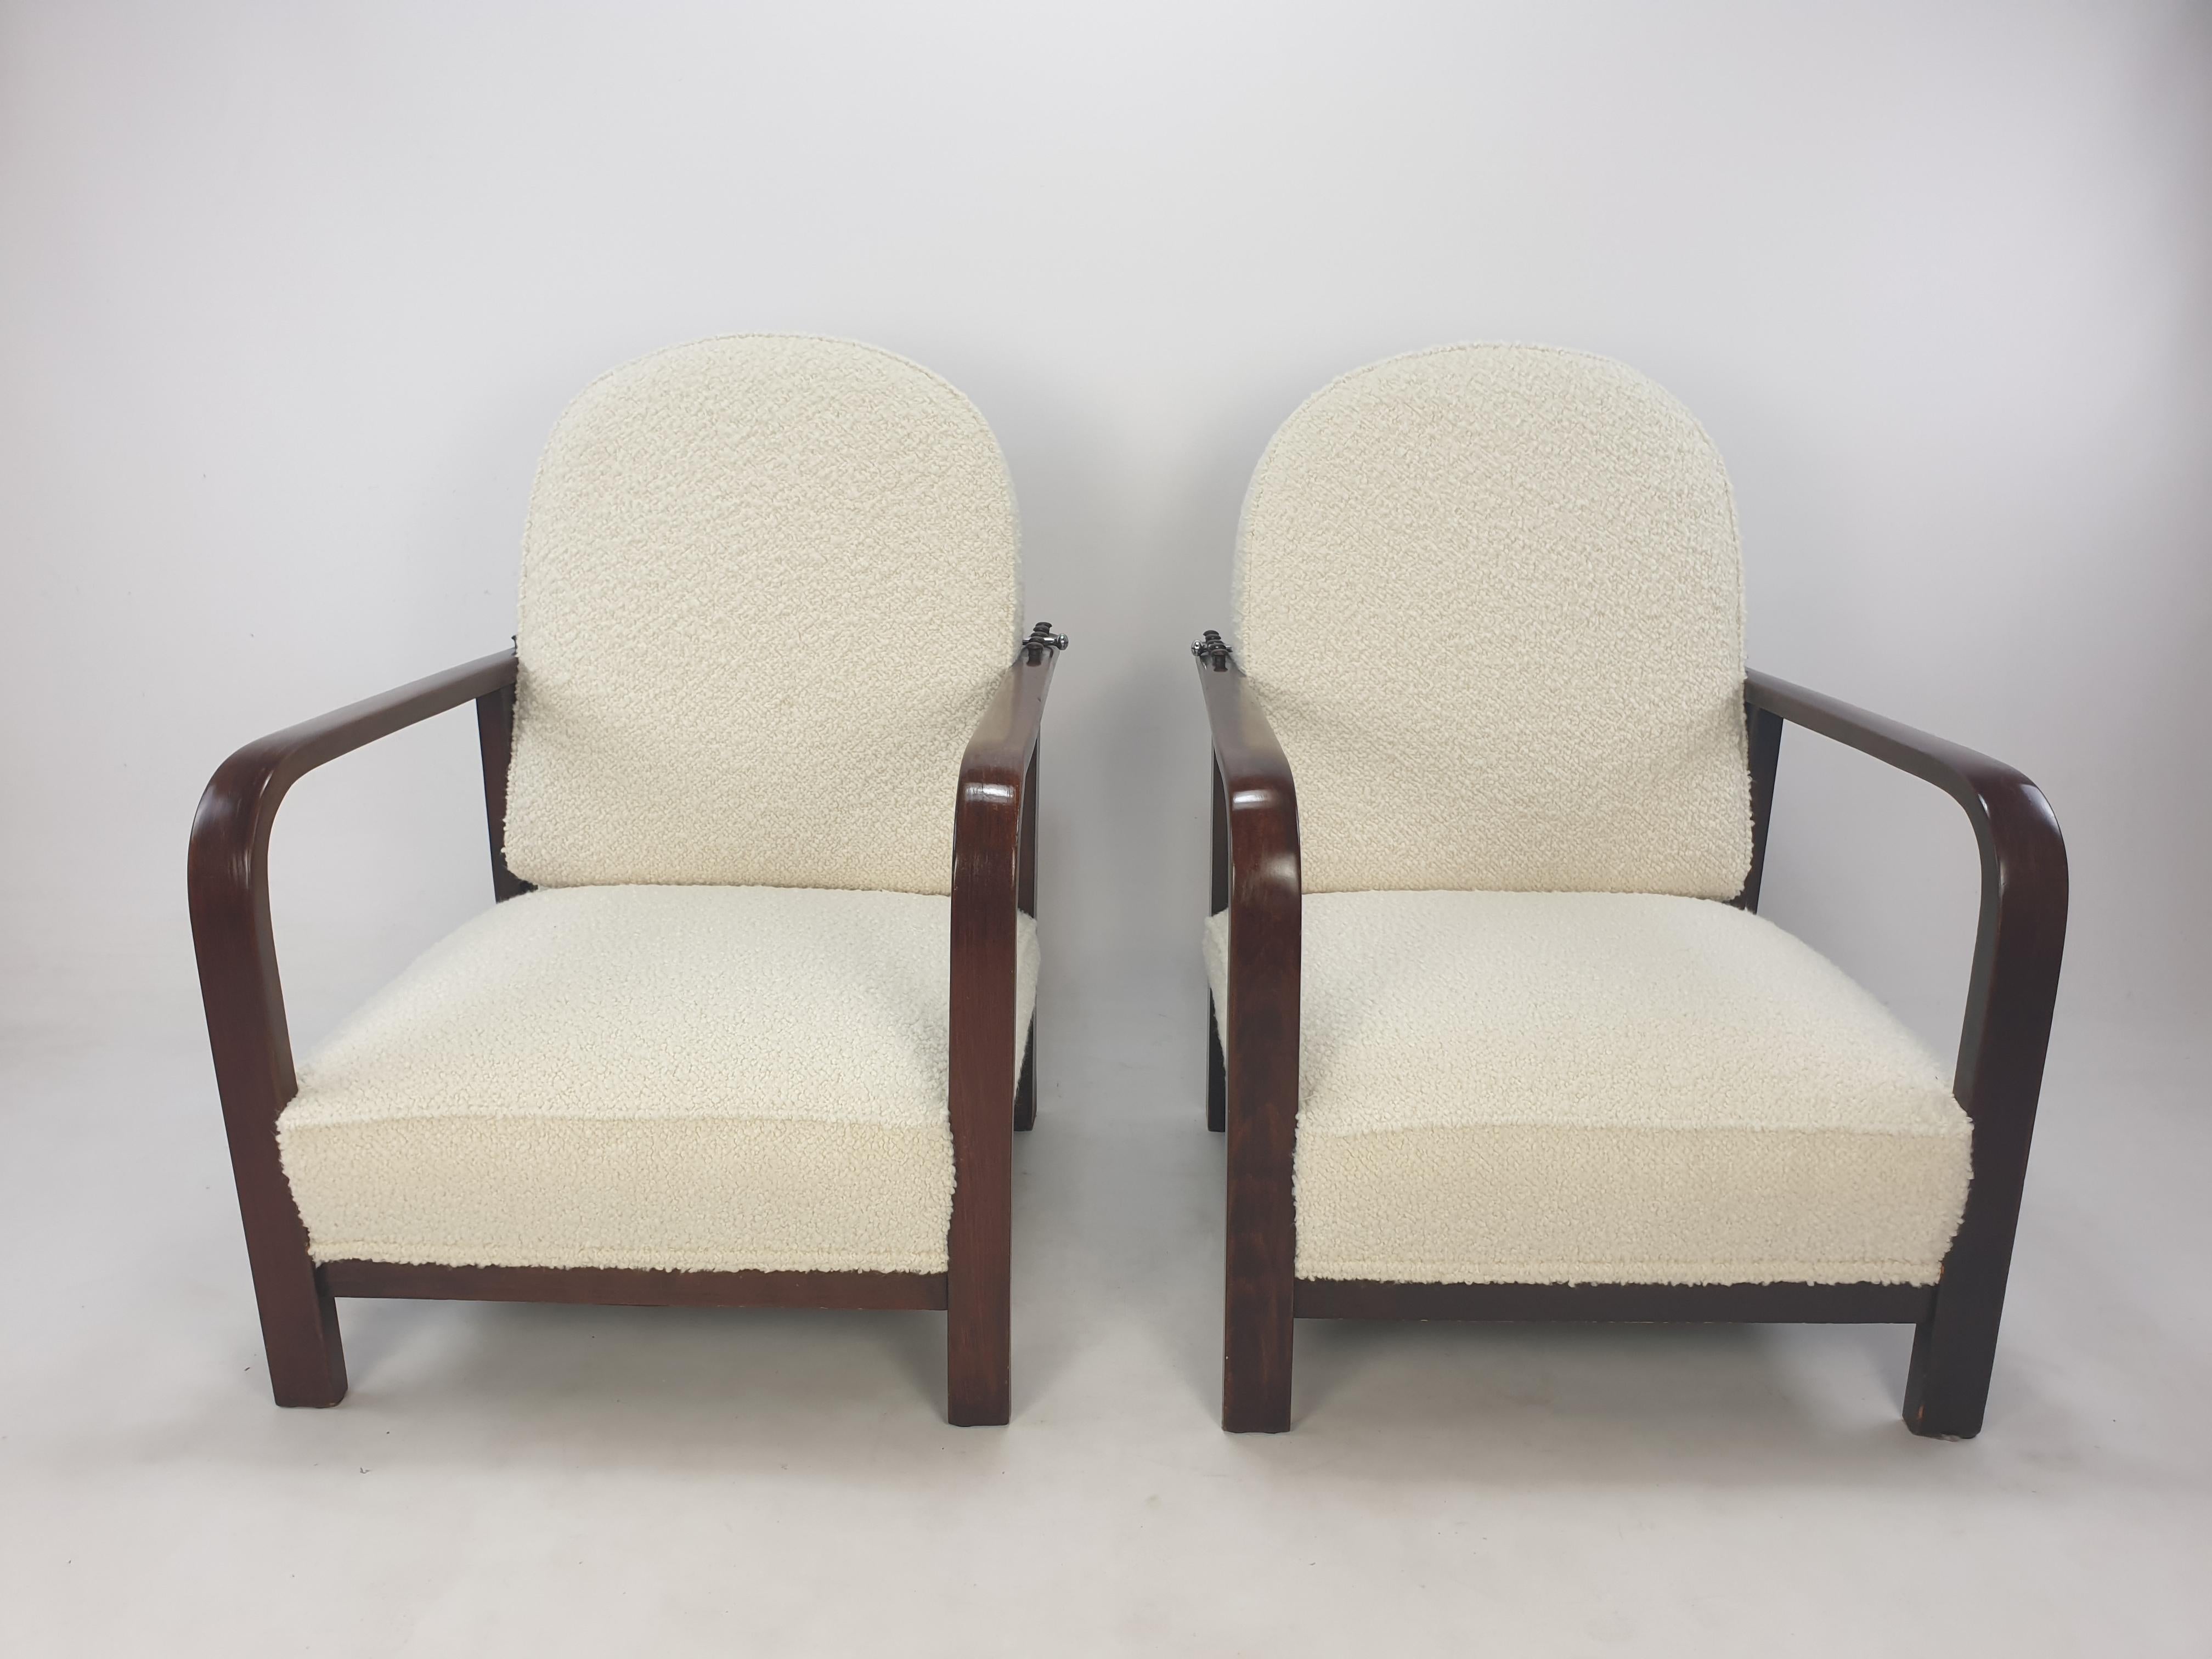 Stunning and very rare pair of Thonet lounge chairs, fabricated in the 30's.
Both chairs of this magnificent set are marked in the wood under the bottom (see picture).

They are very comfortable and it is possible to adjust the back of the